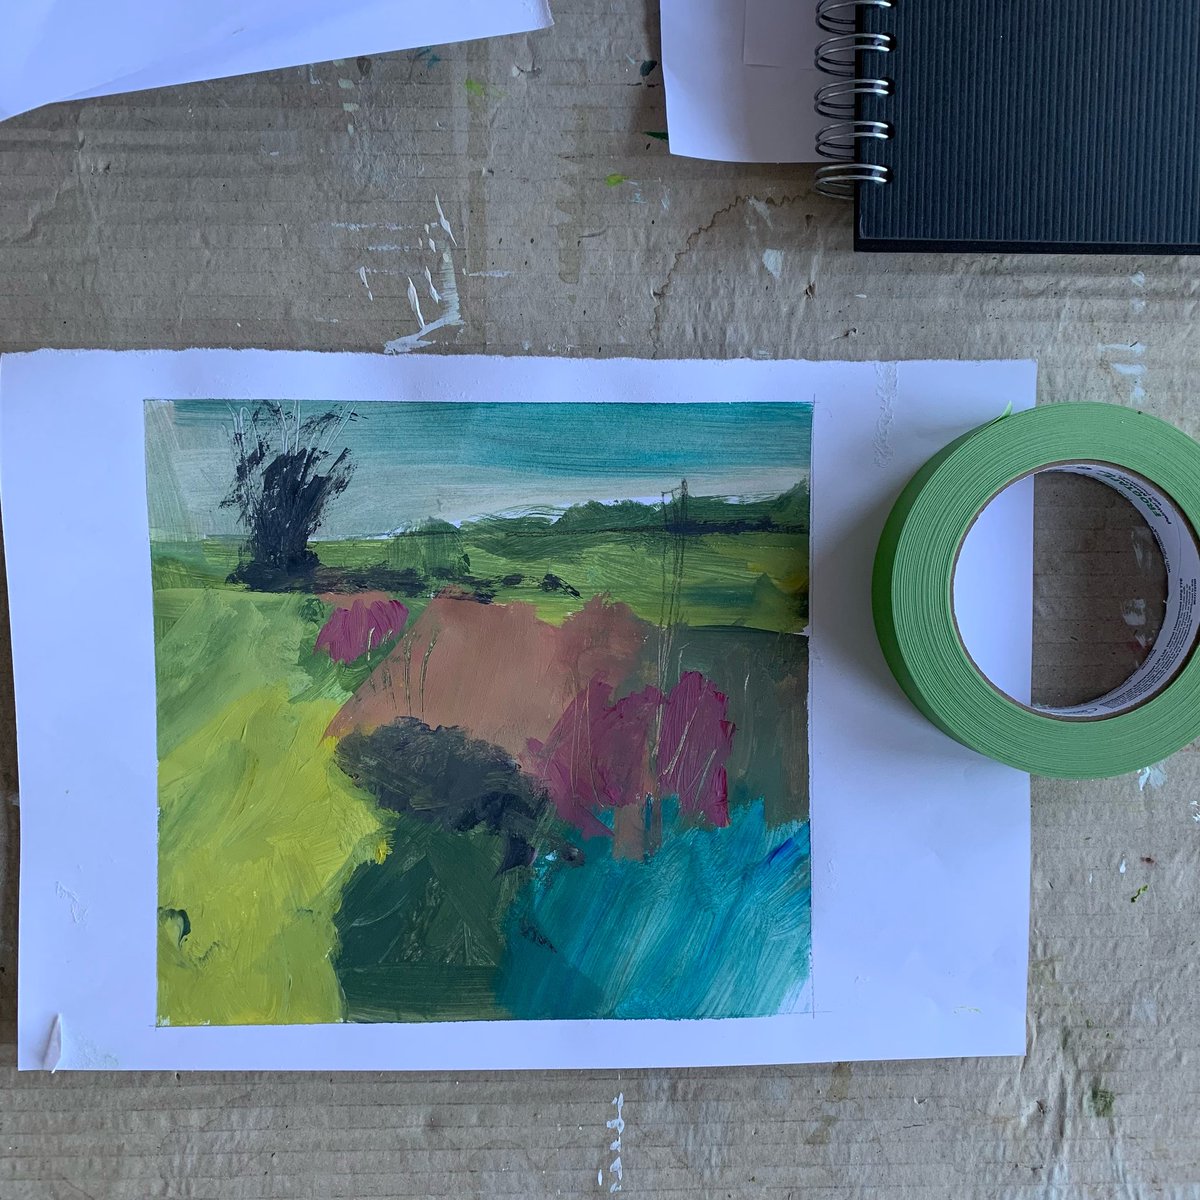 Colour notes. The first of a few little sketches on paper inspired by the shapes and colours of the local landscape in early January
#sketch
#landscapepainting 
#abstractlandscape 
#britishlandscape 
#winter 
#wintercolours 
#shapes
#colourandform 
#contemporaryart